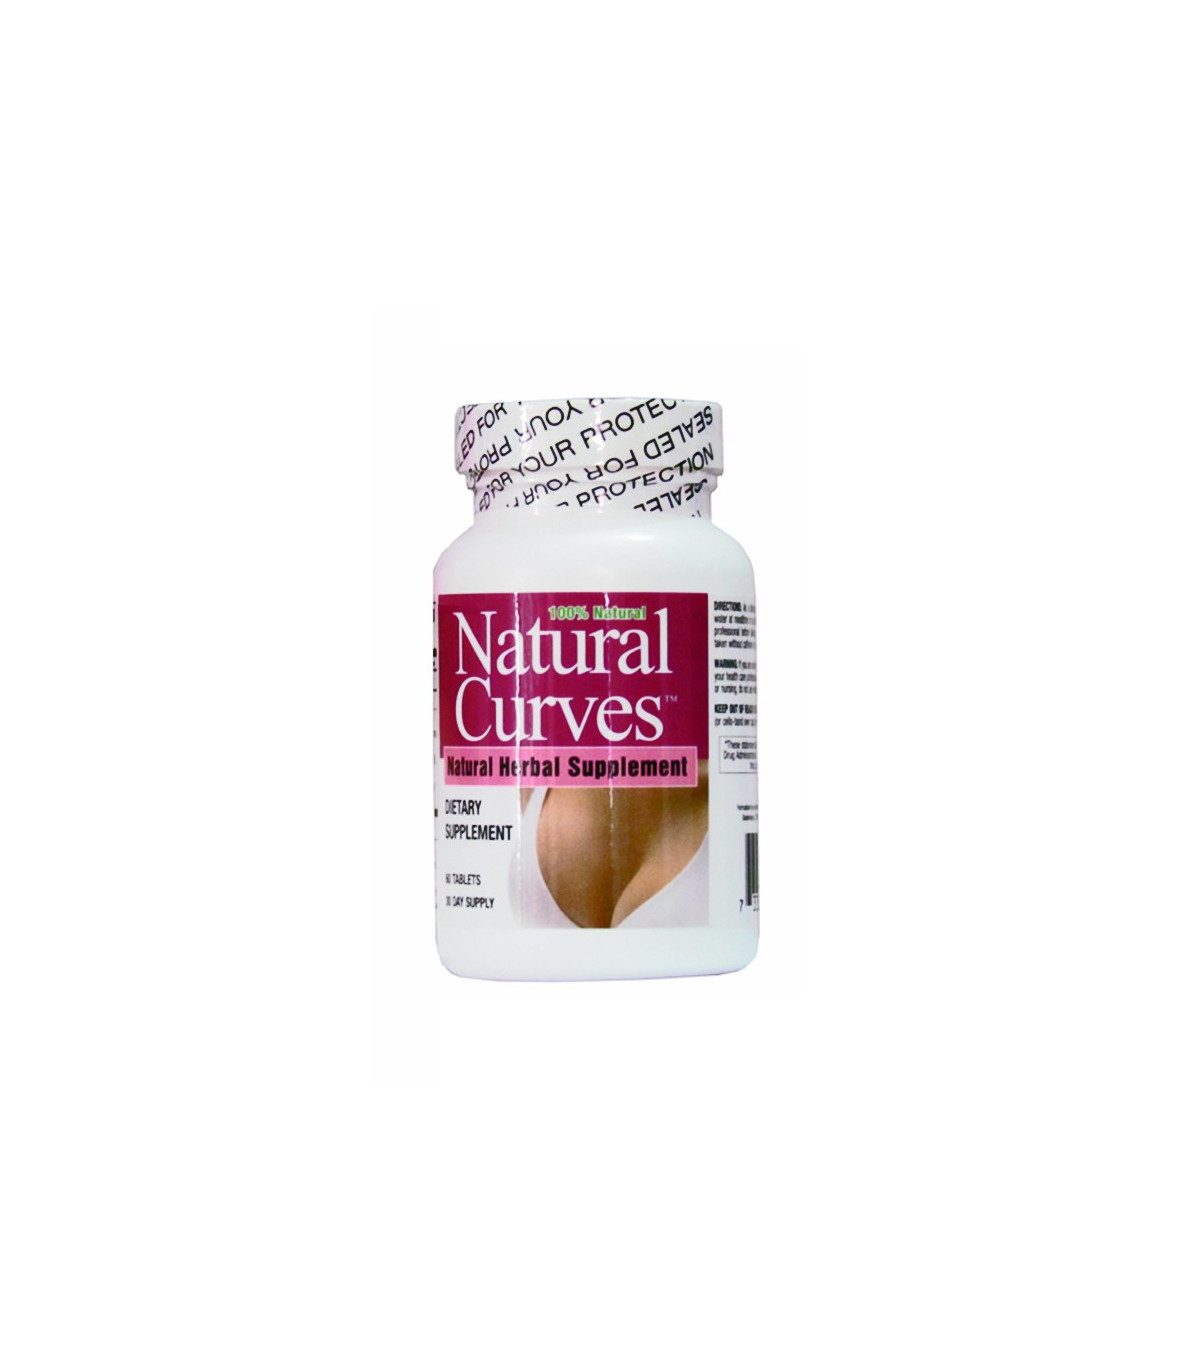 BioTech Natural Curves Herbal Supplement – 60 Tablets